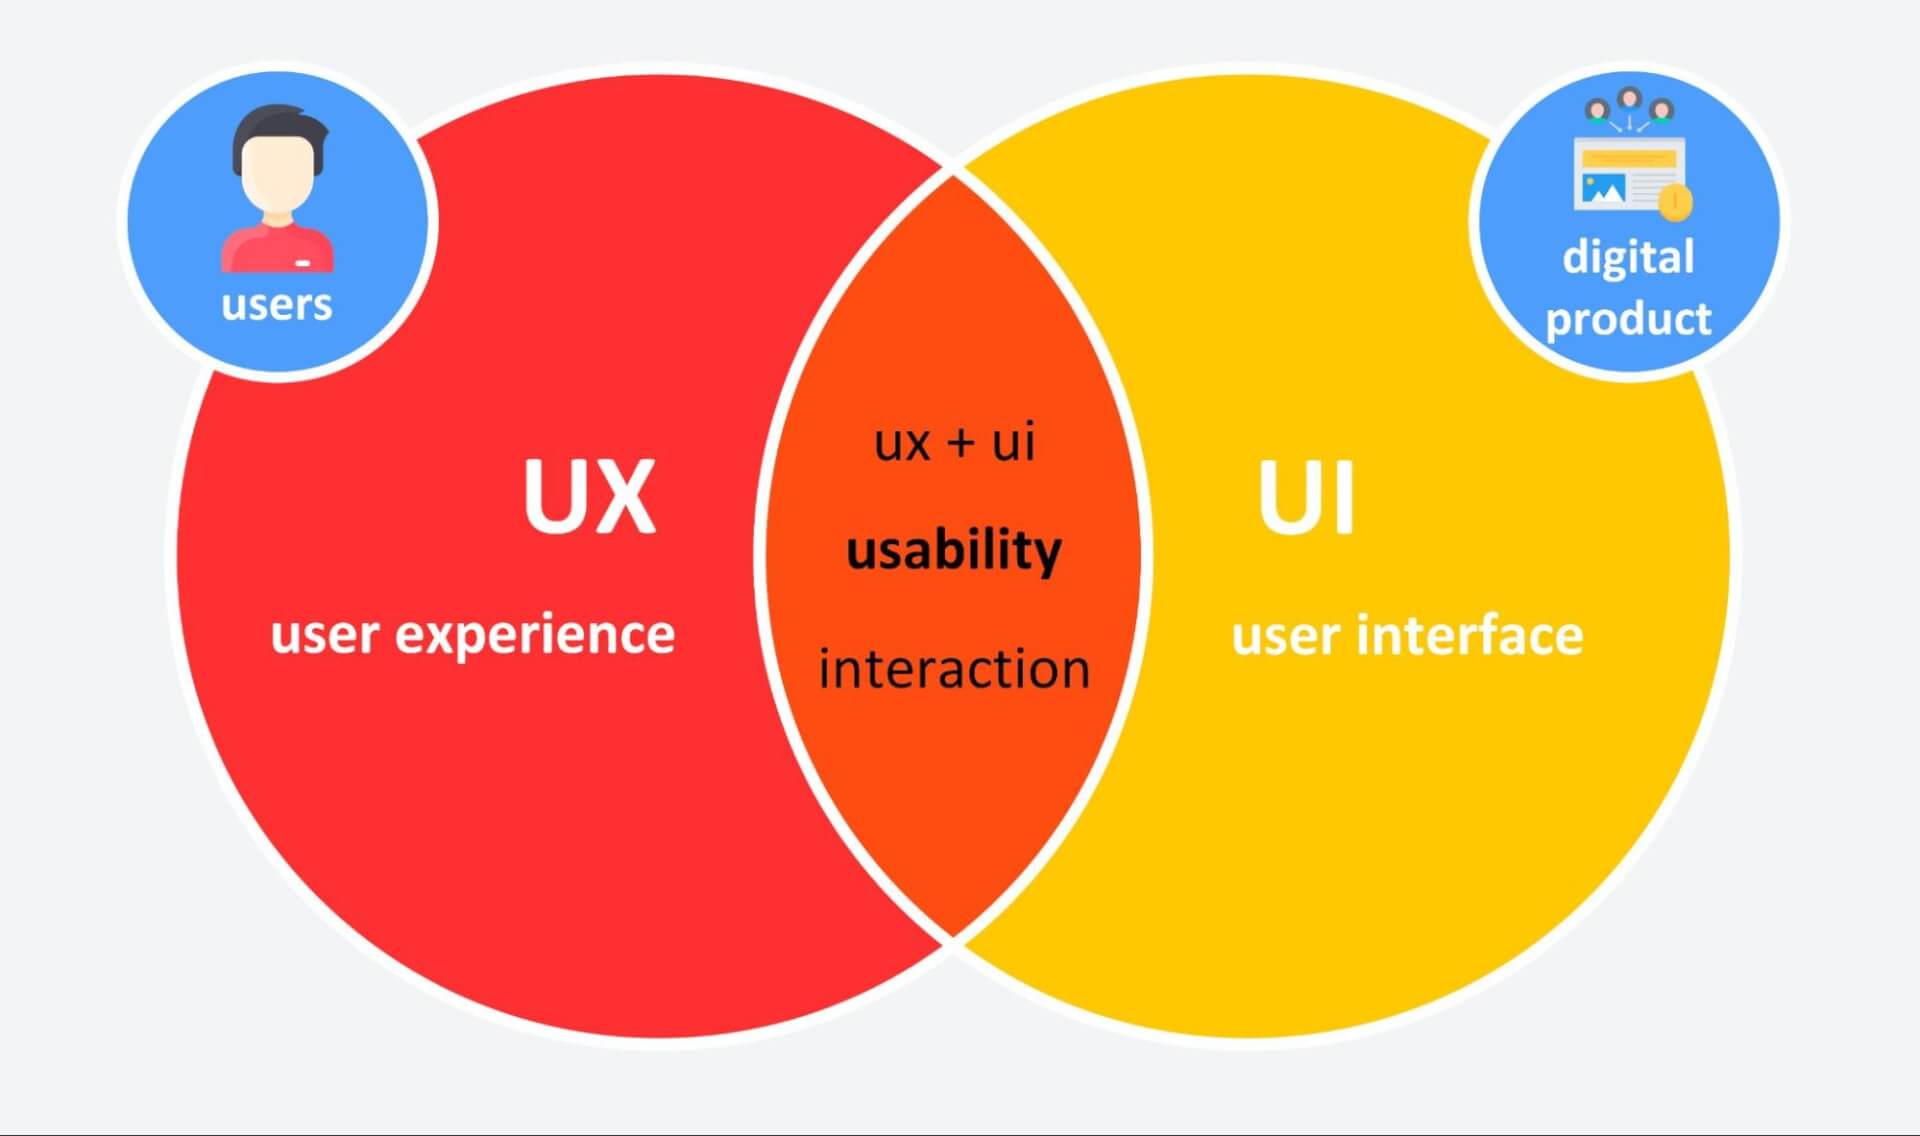 The overlap and result of good UI and UX is 